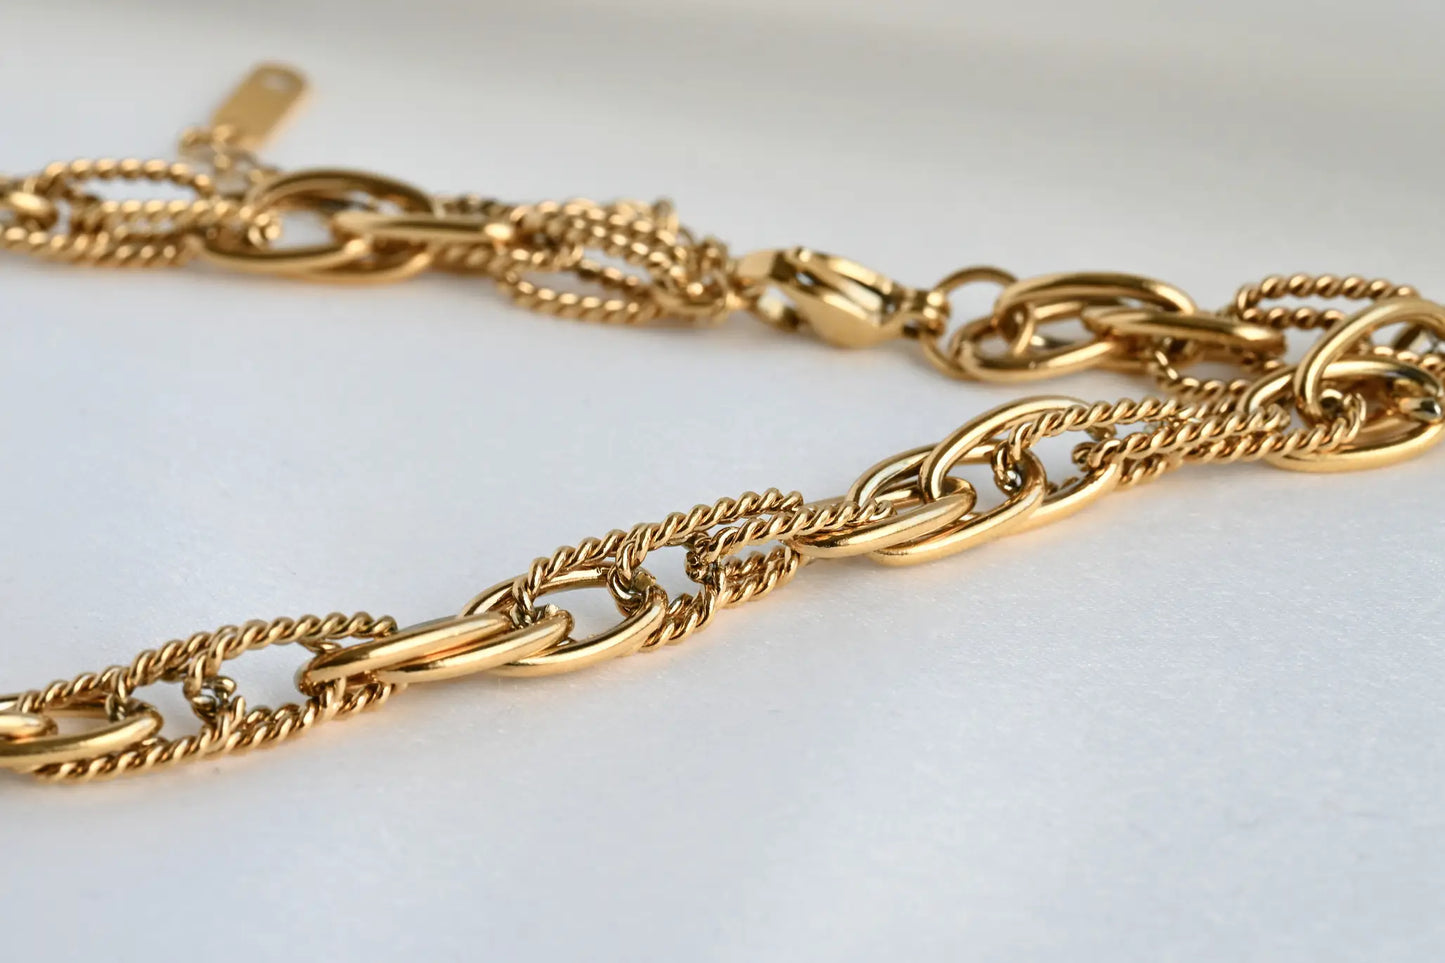 Dual Chain Necklace - Twist Link Chain Necklace